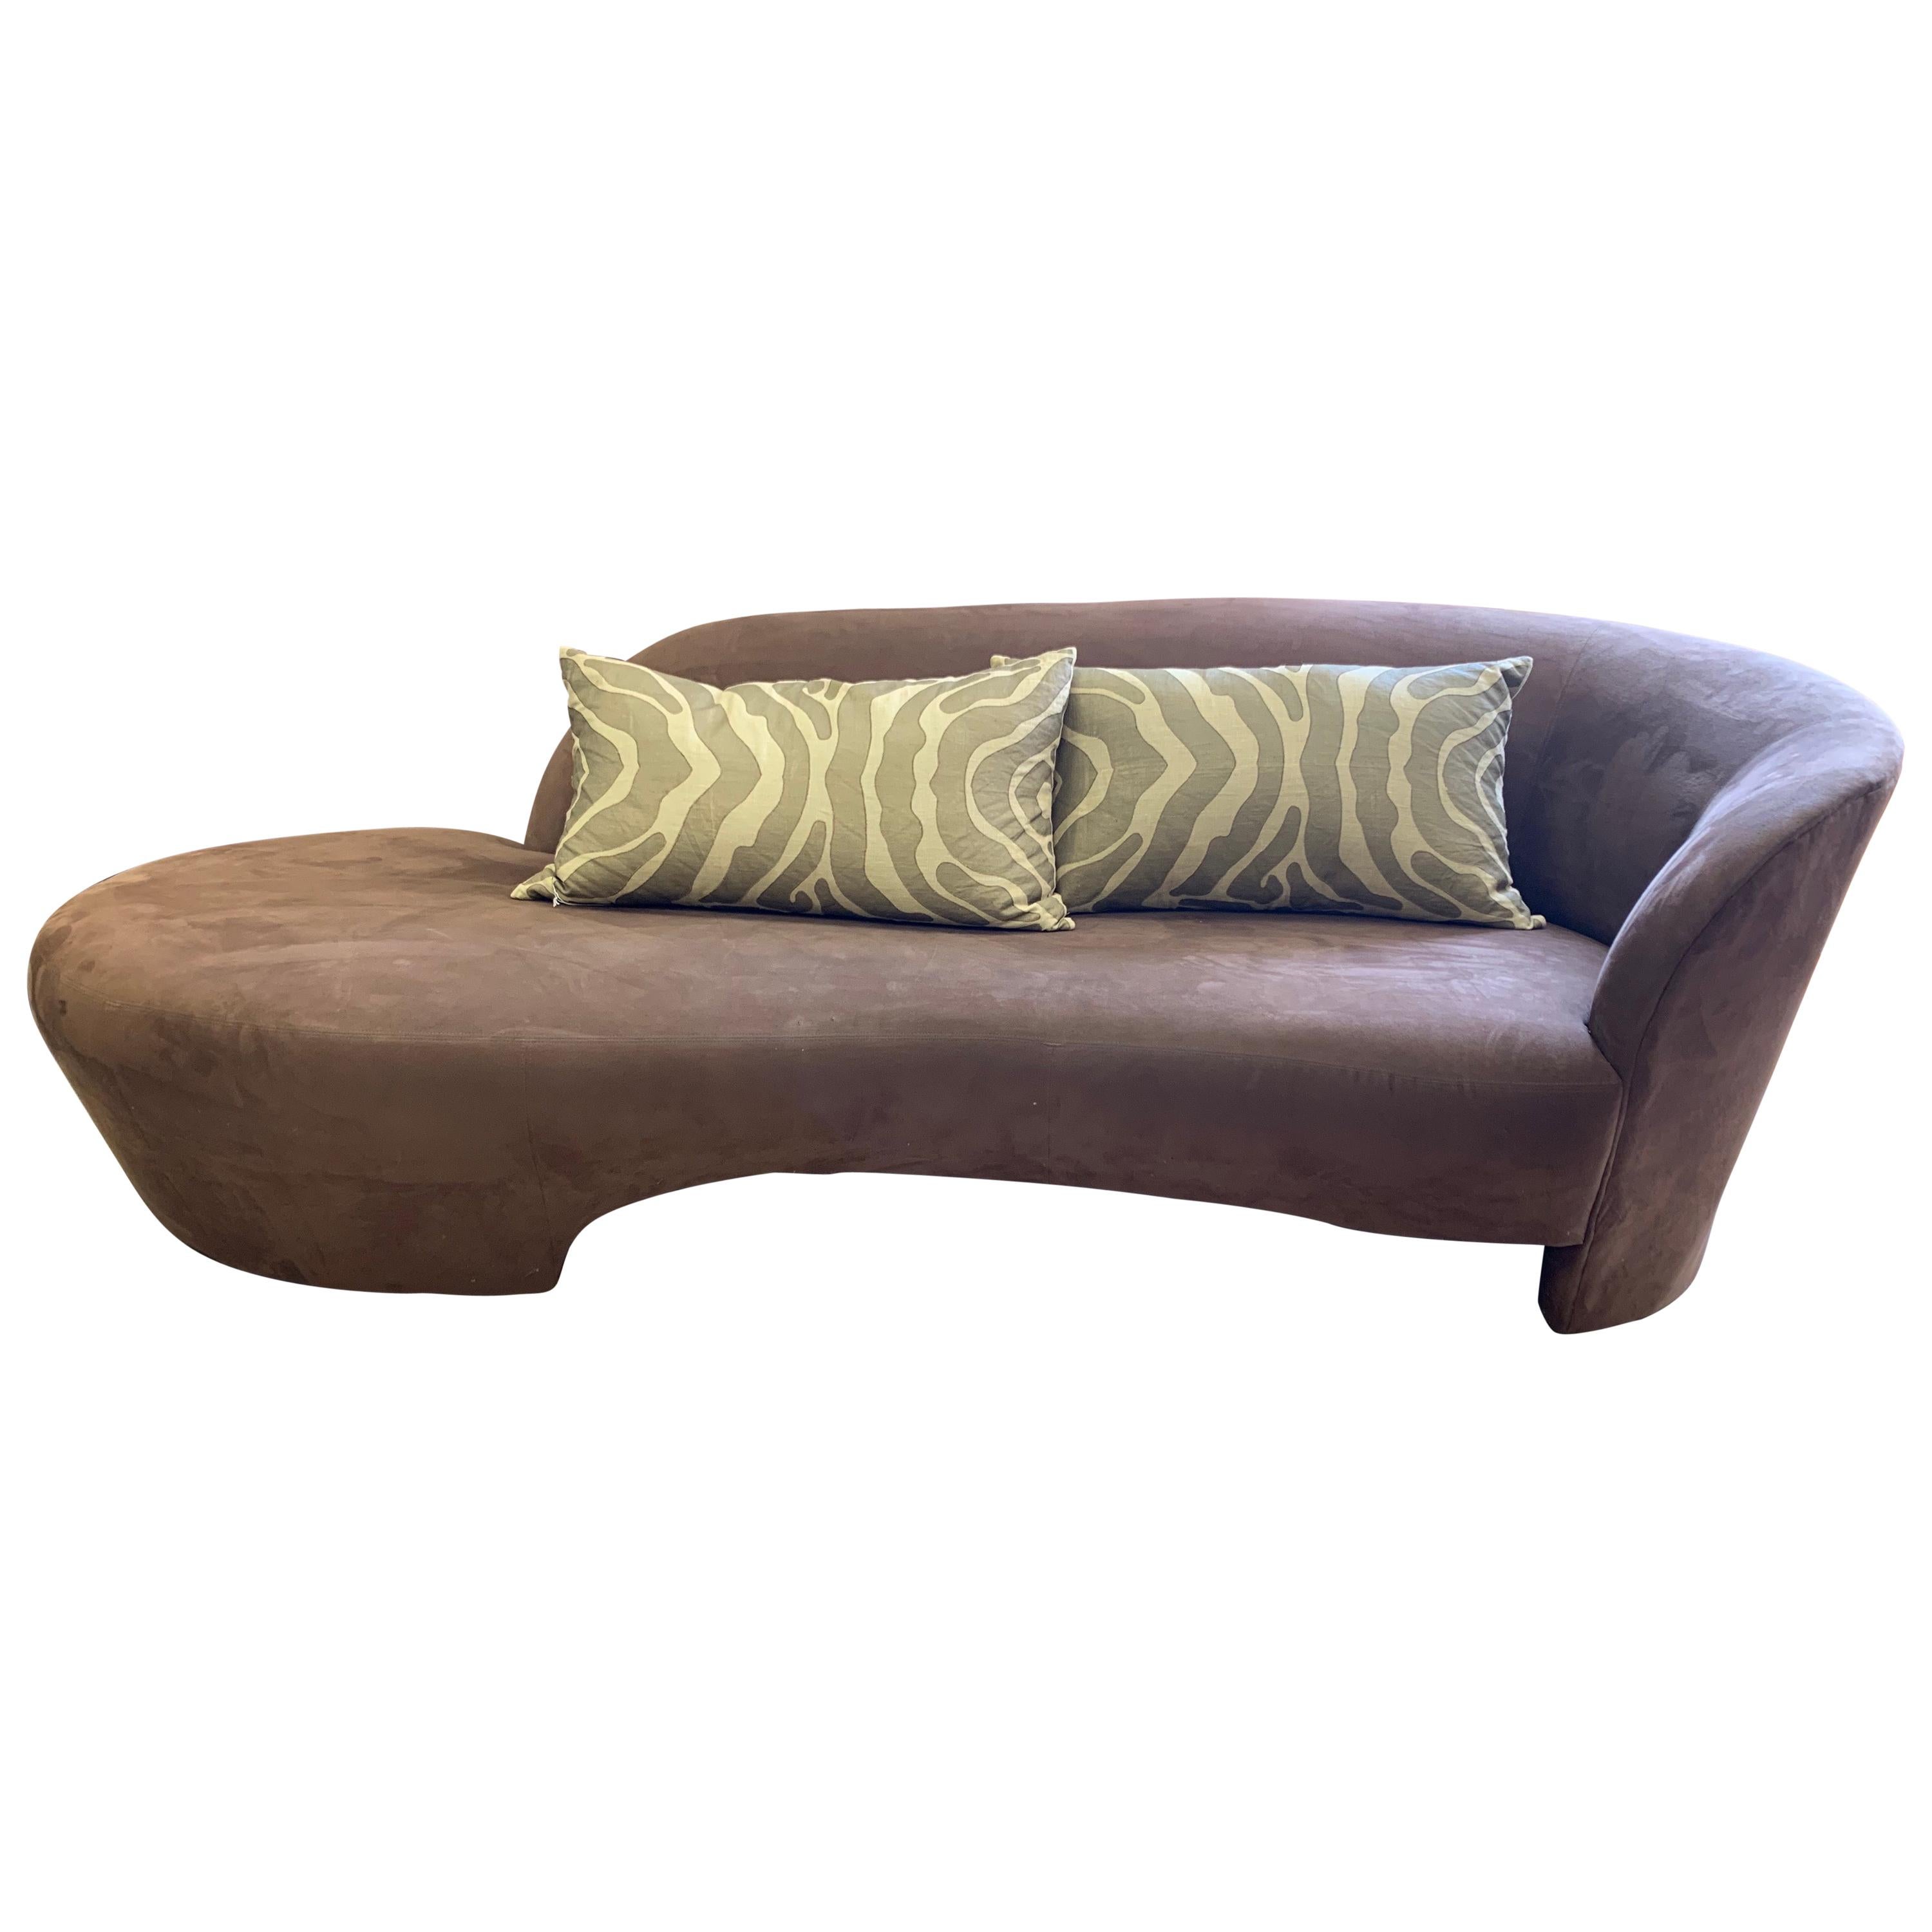 Vladimir Kagan Weiman Preview Chaise Lounges Longes Sofa Chocolate Brown Suede